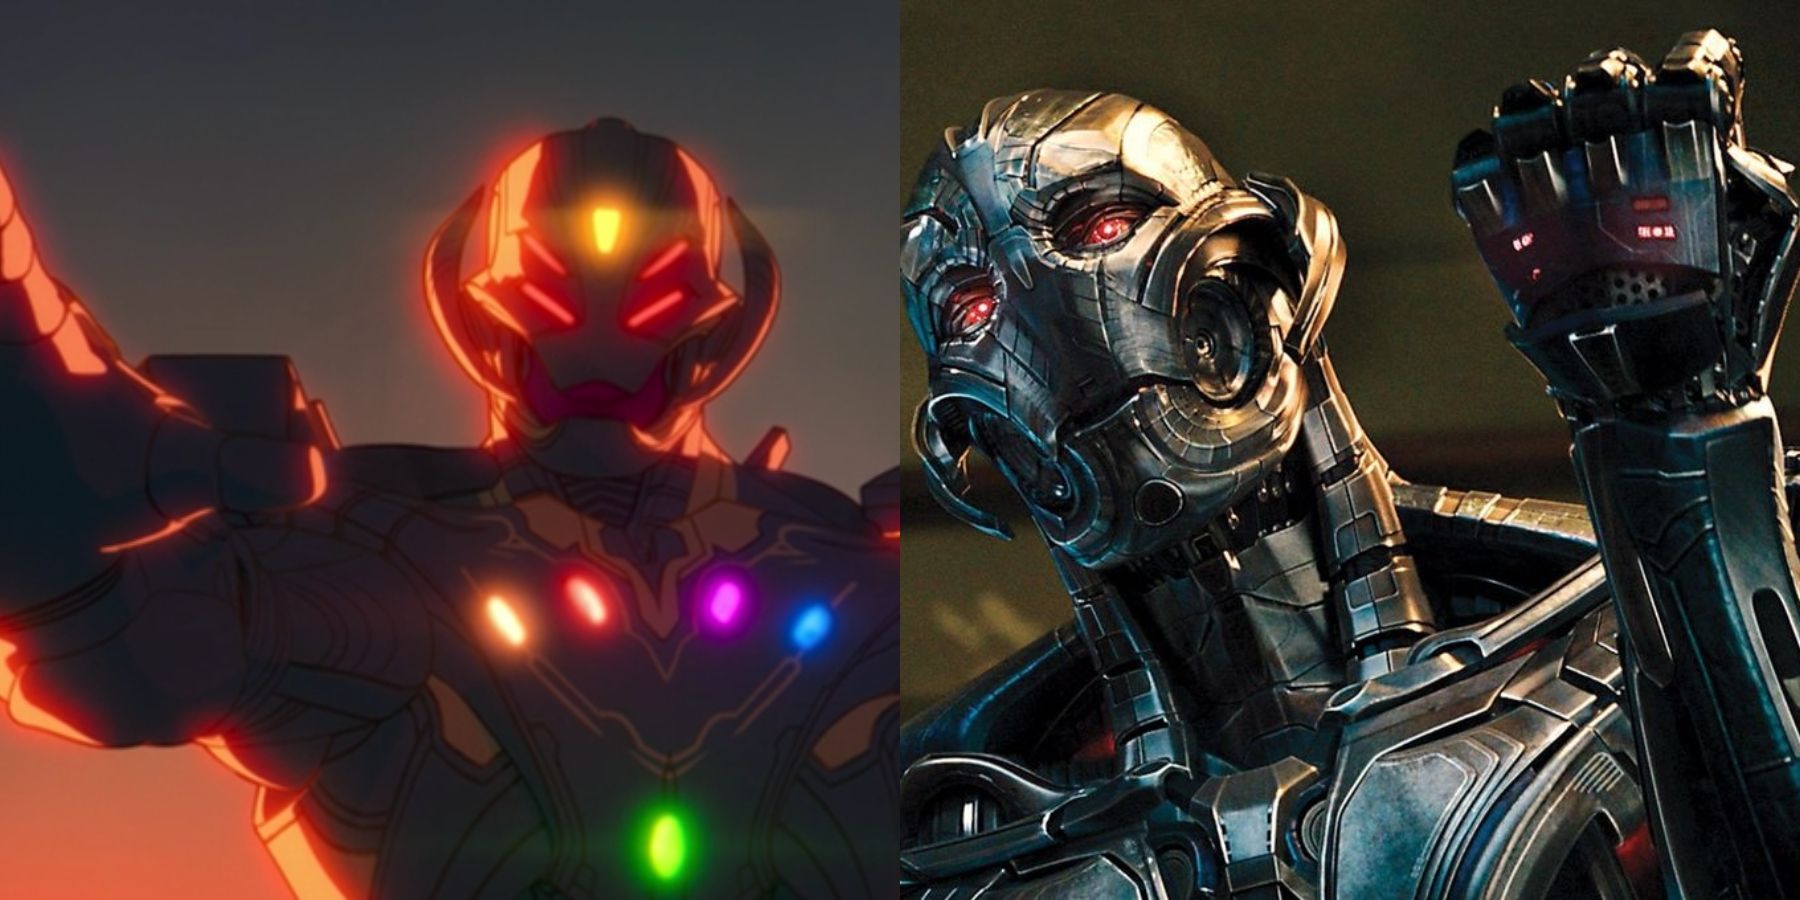 What-If-Ultron-vs-Live-Action